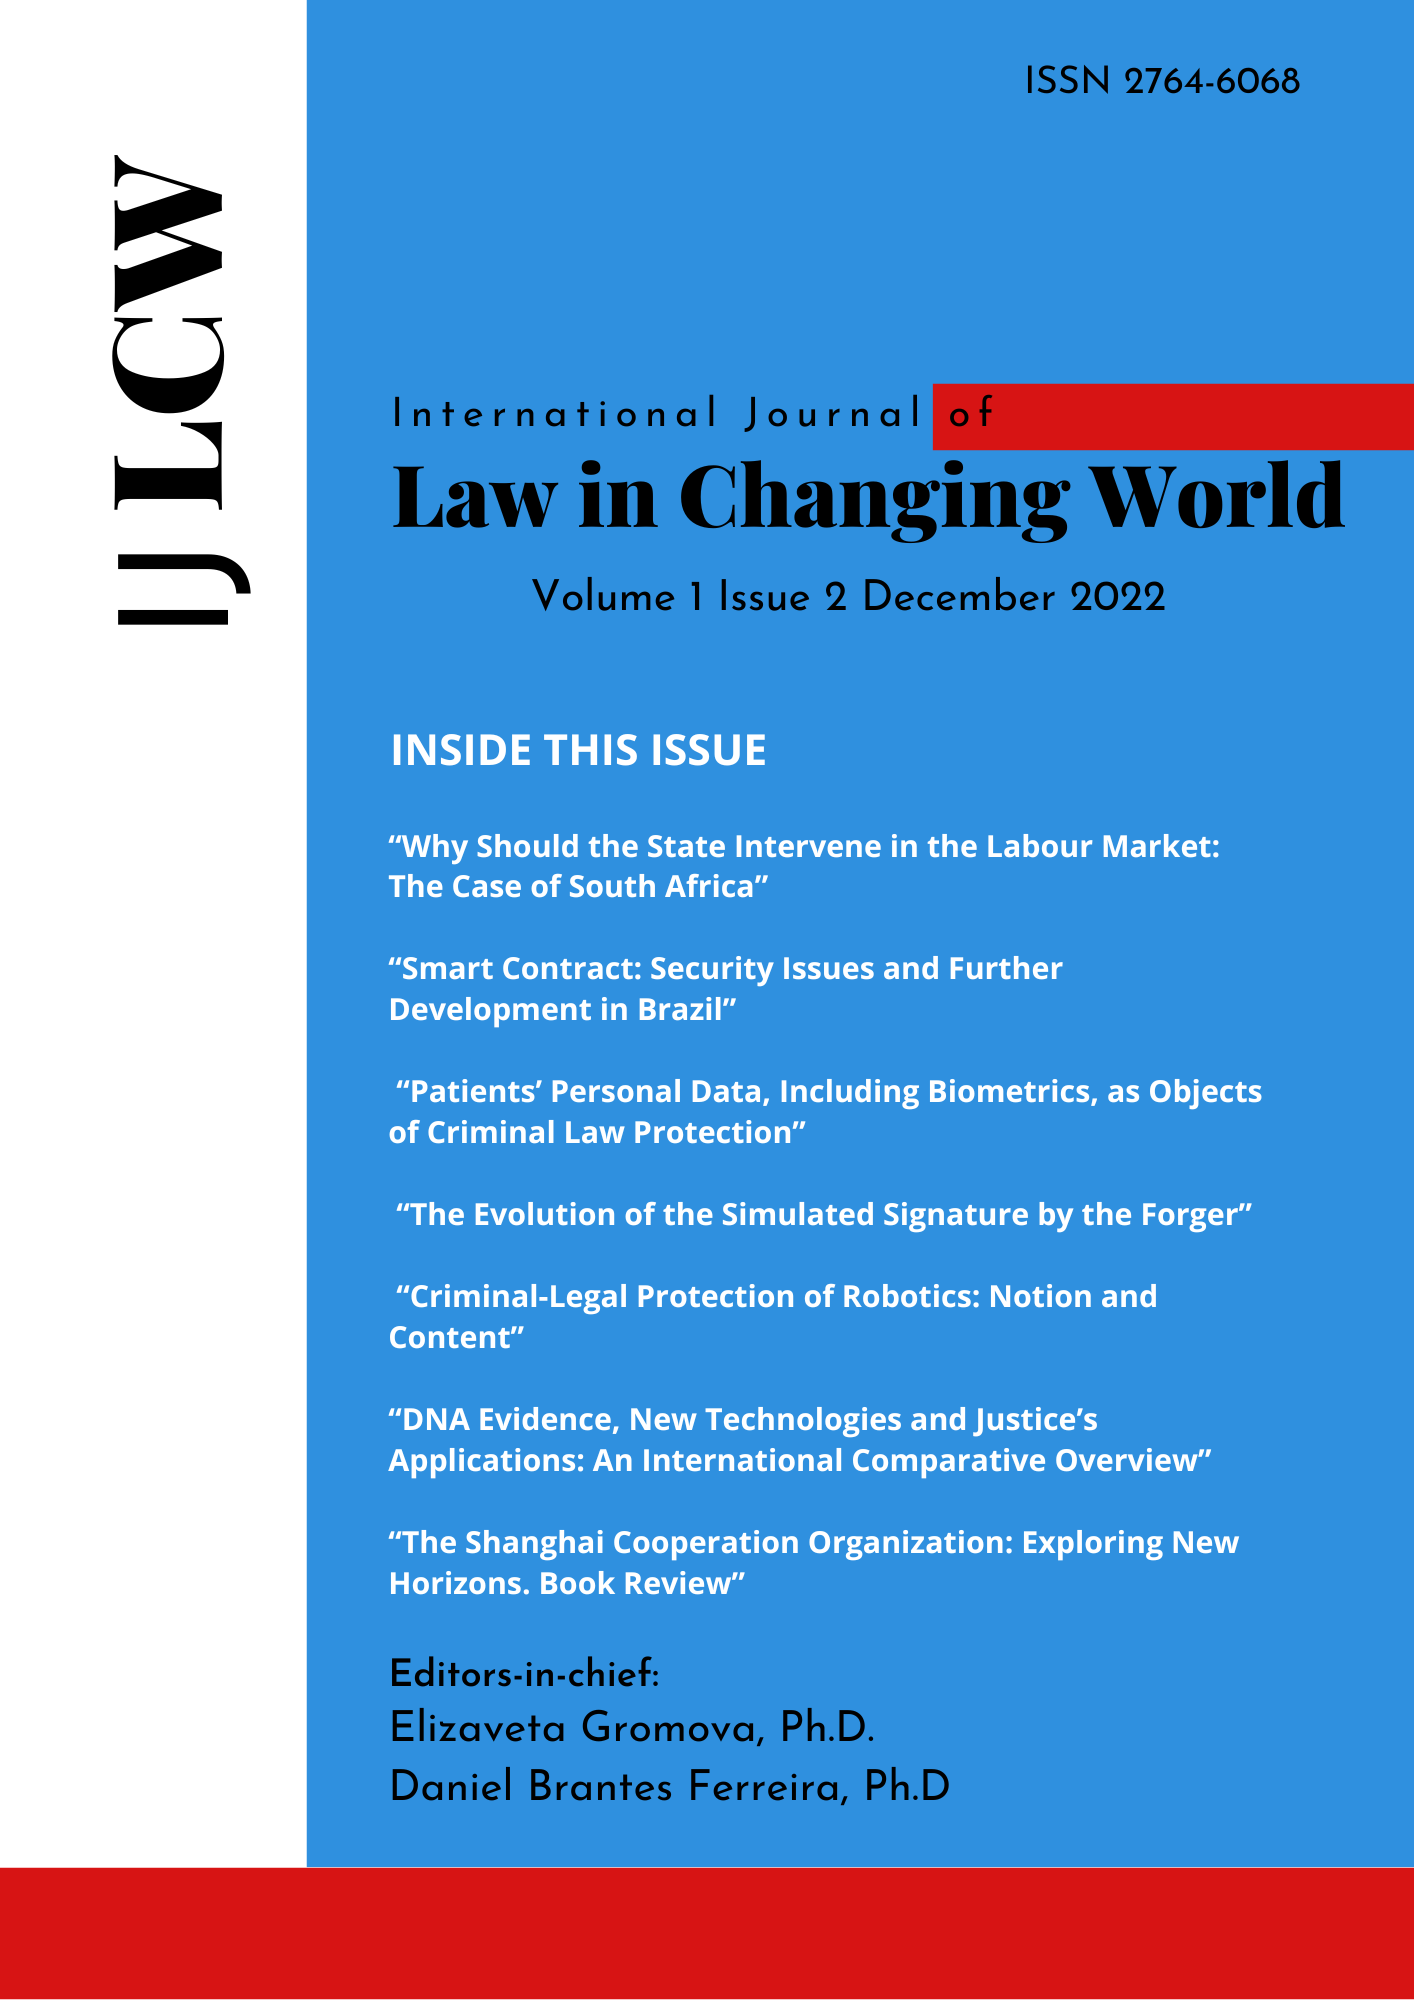 					View Vol. 1 No. 2 (2022): The International Journal of Law in Changing World Issue 2 2022
				